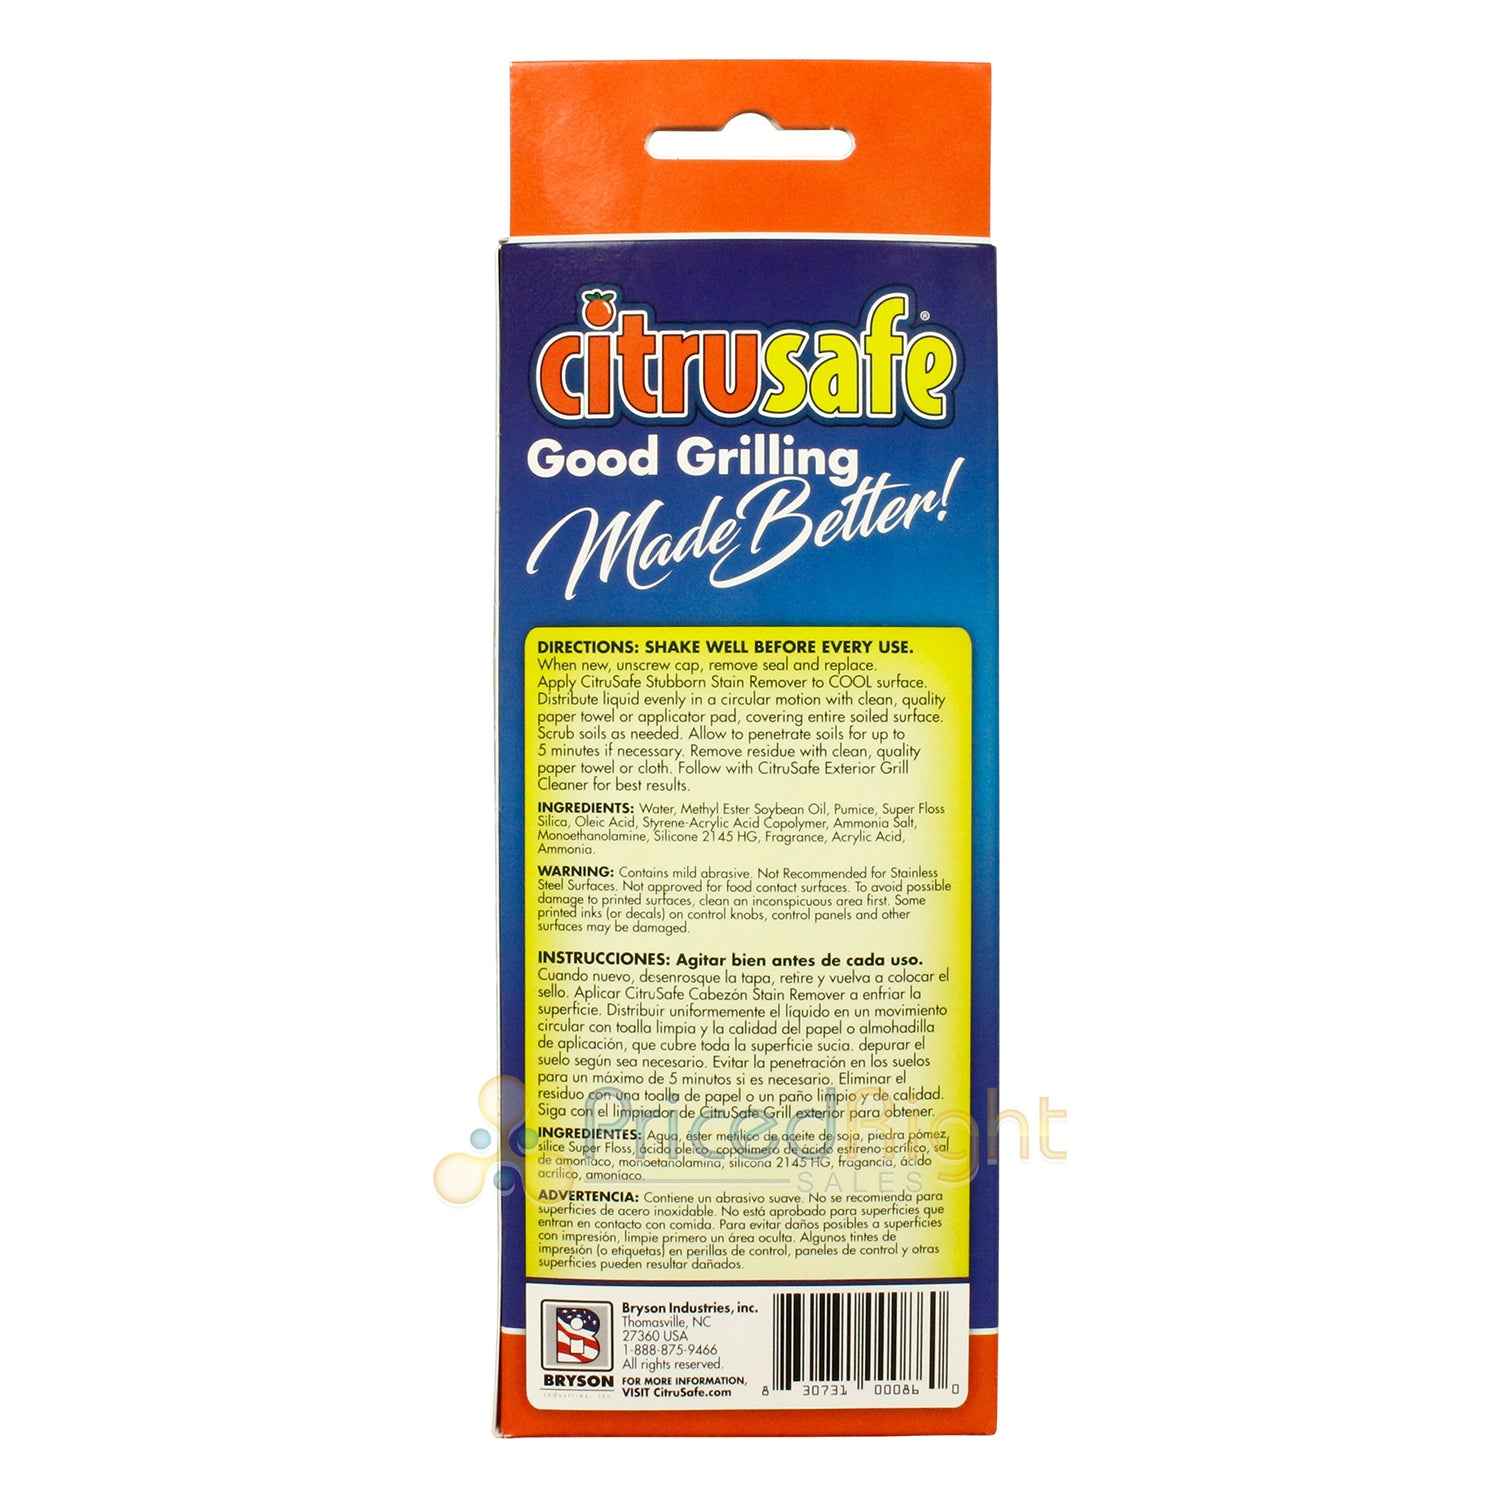 Citrusafe Stubborn Stain Remover Grill Cleaner with 2 Scrubber Pads 6 Fl Oz